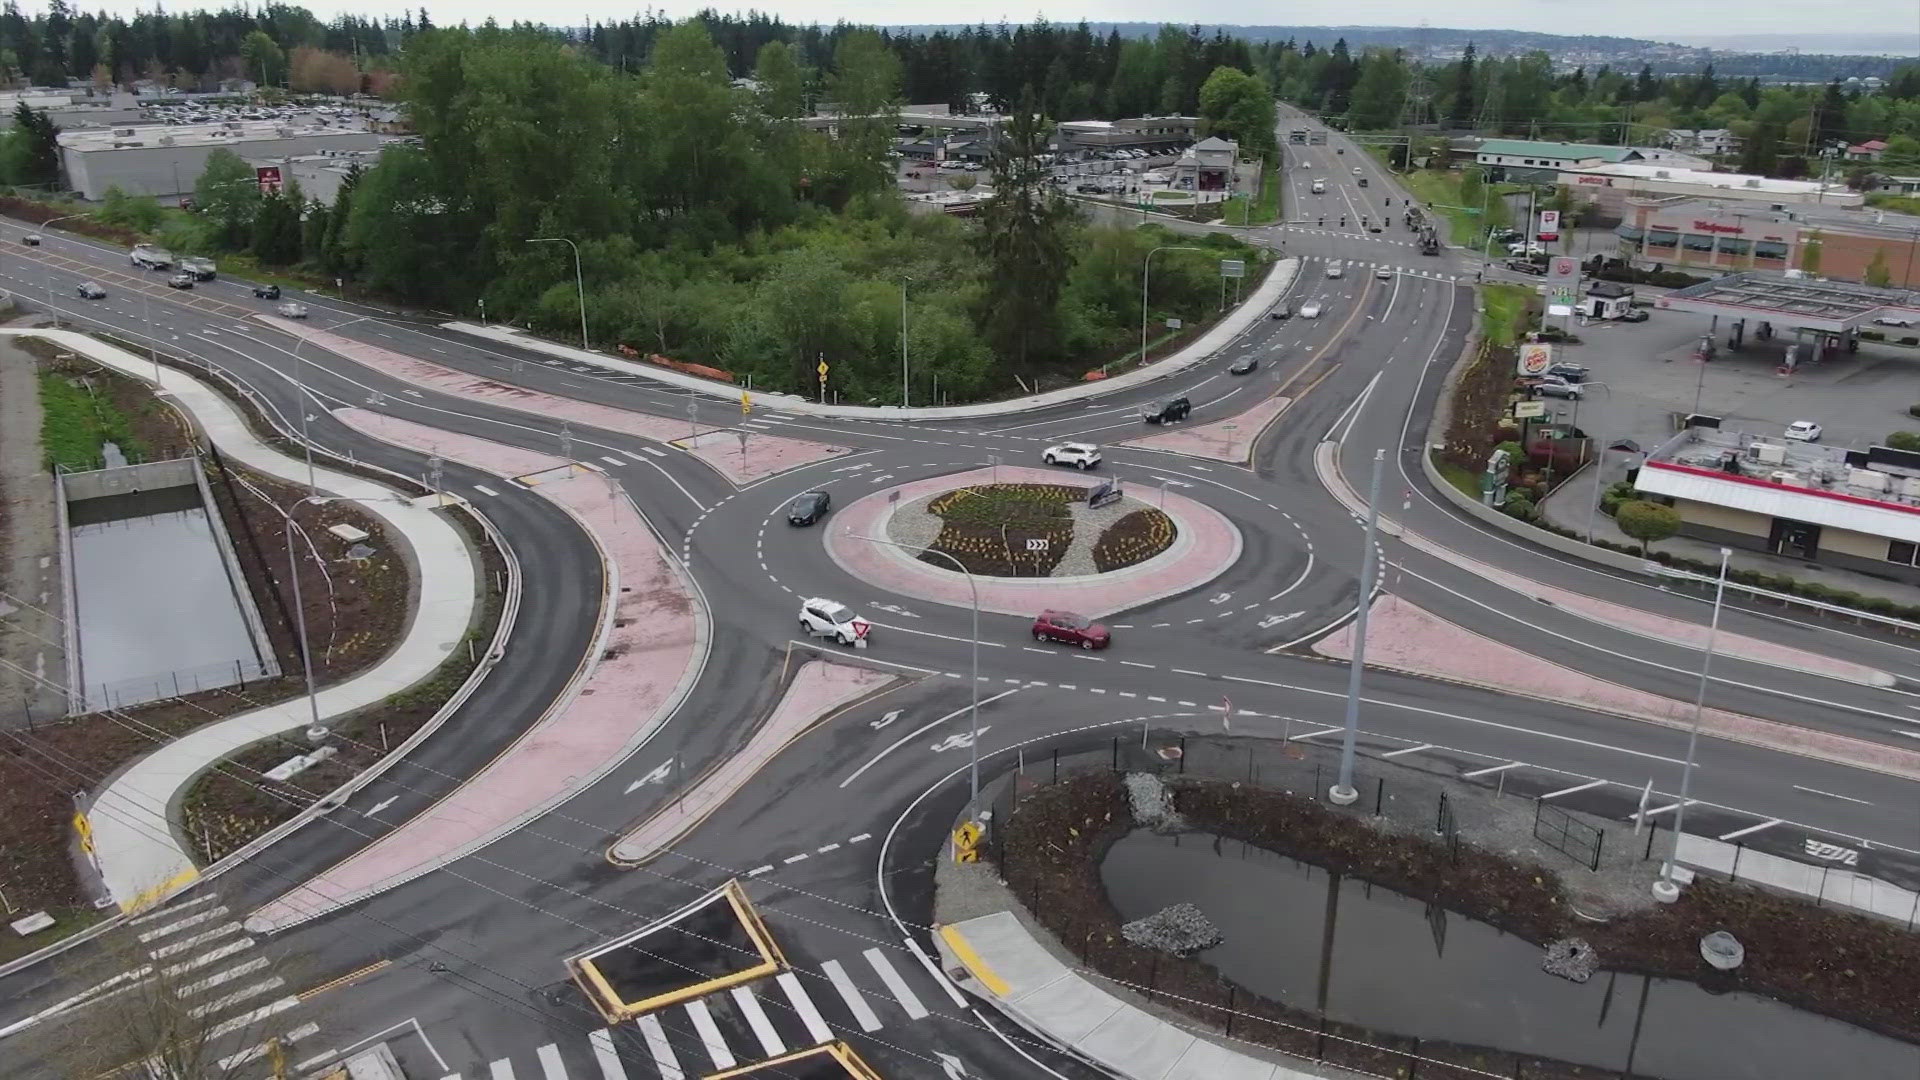 The Insurance Institute for Highway Safety says roundabouts decrease accidents by 75%. But Lake Stevens residents say they see daily crashes at their roundabouts.